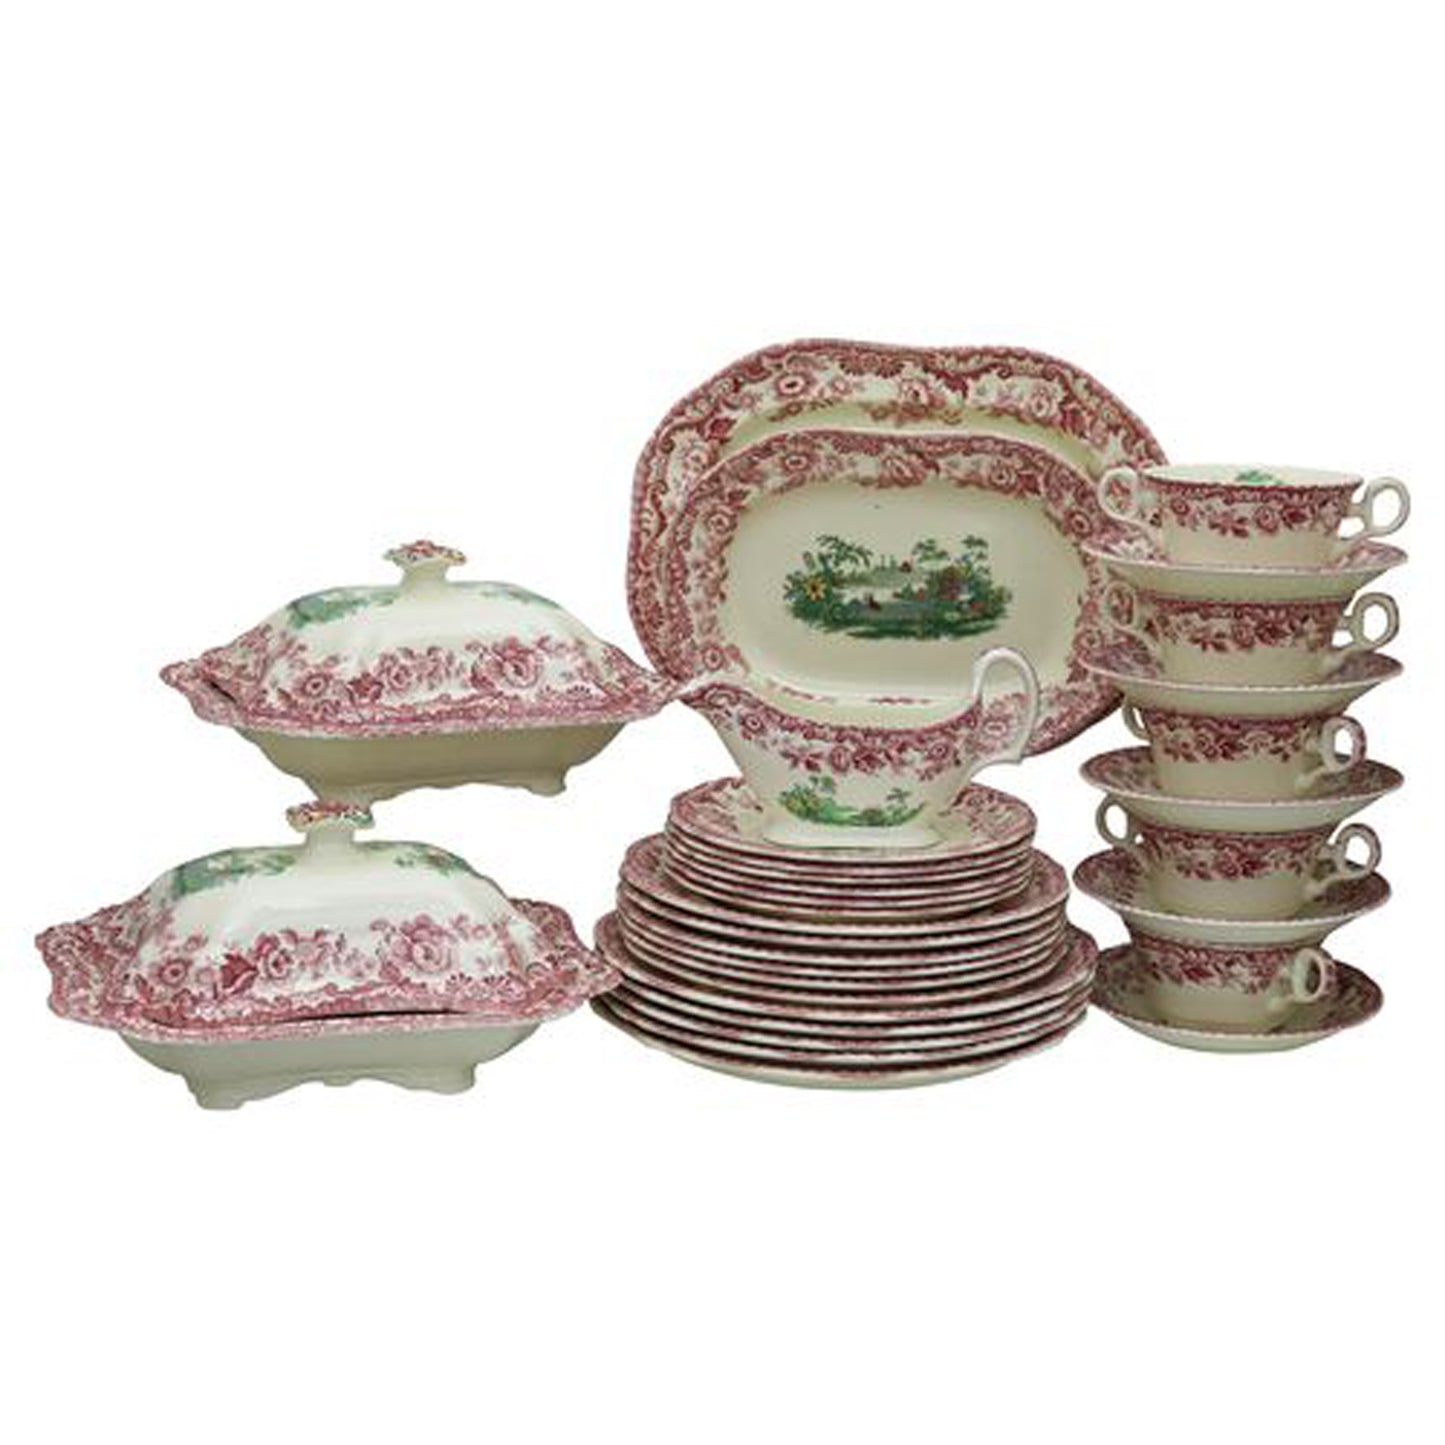 Early 20th Century Copeland Spode Dinner Set - 30 Pieces